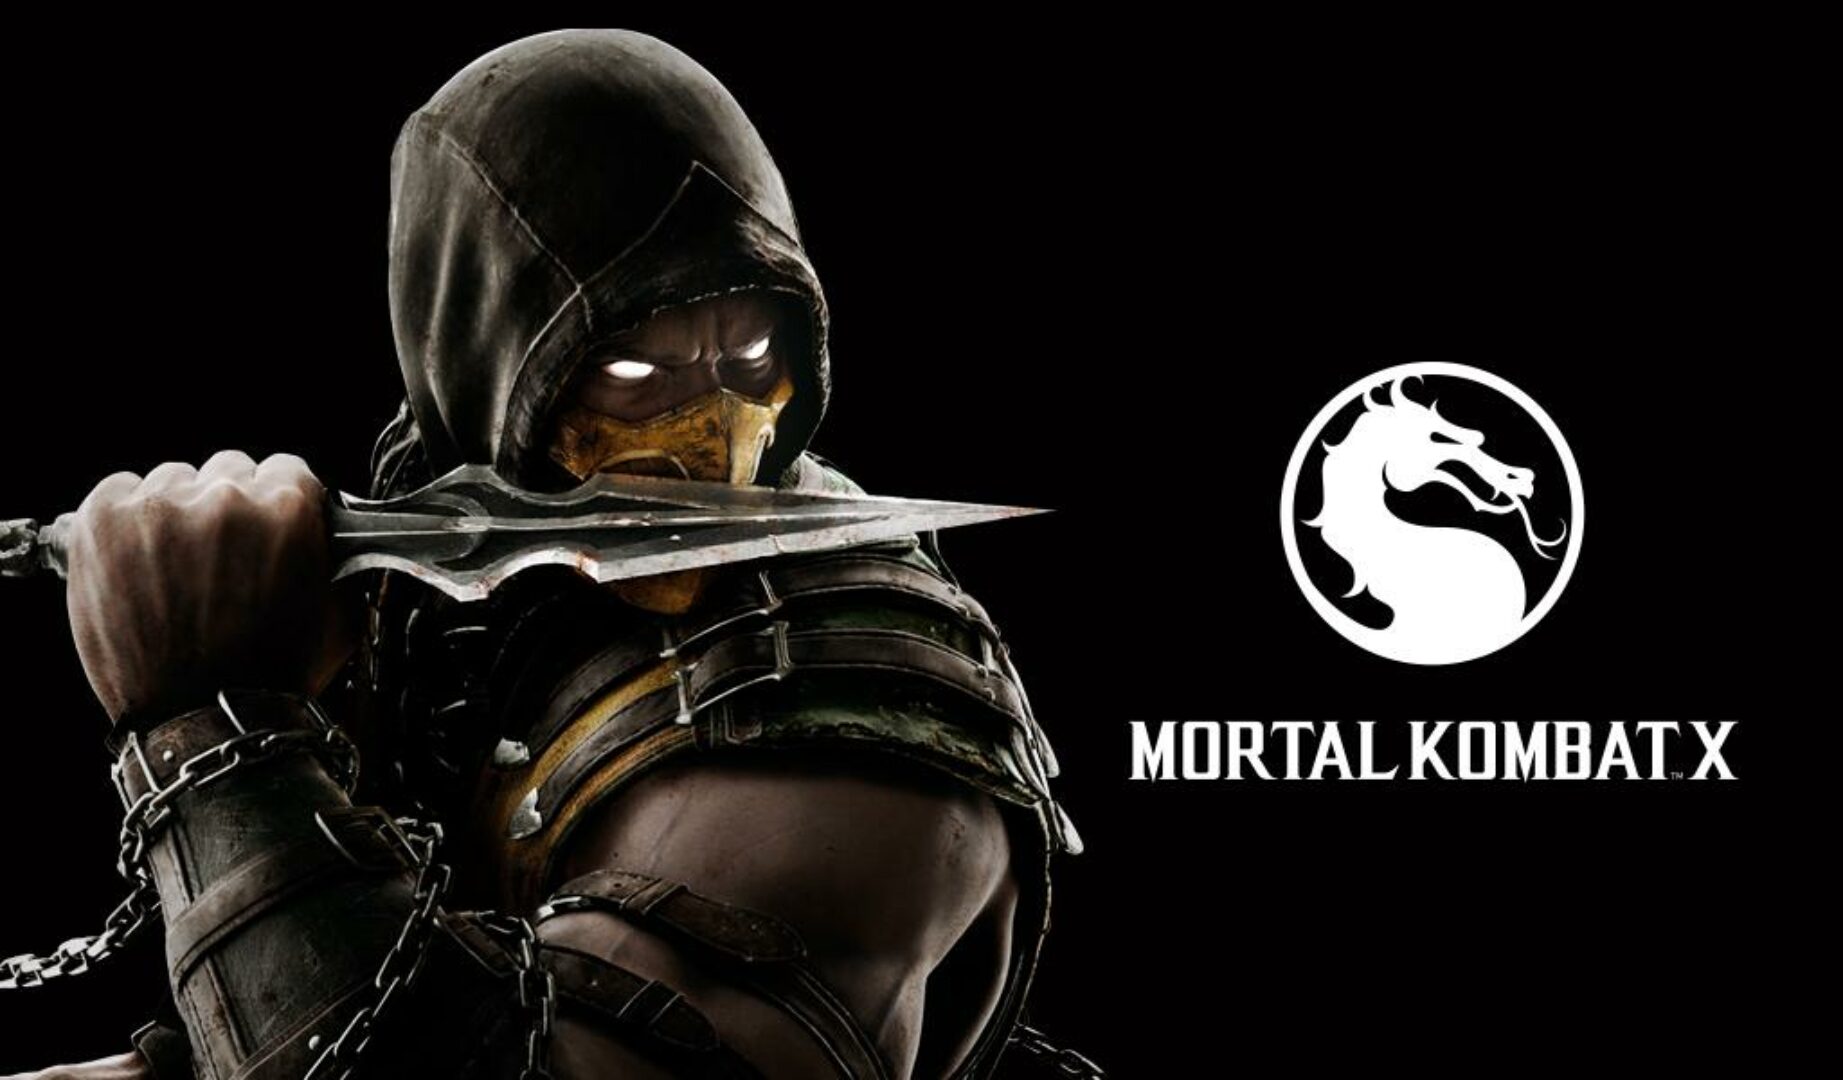 New Mortal Kombat X Trailer Showing off new Fighters Releases